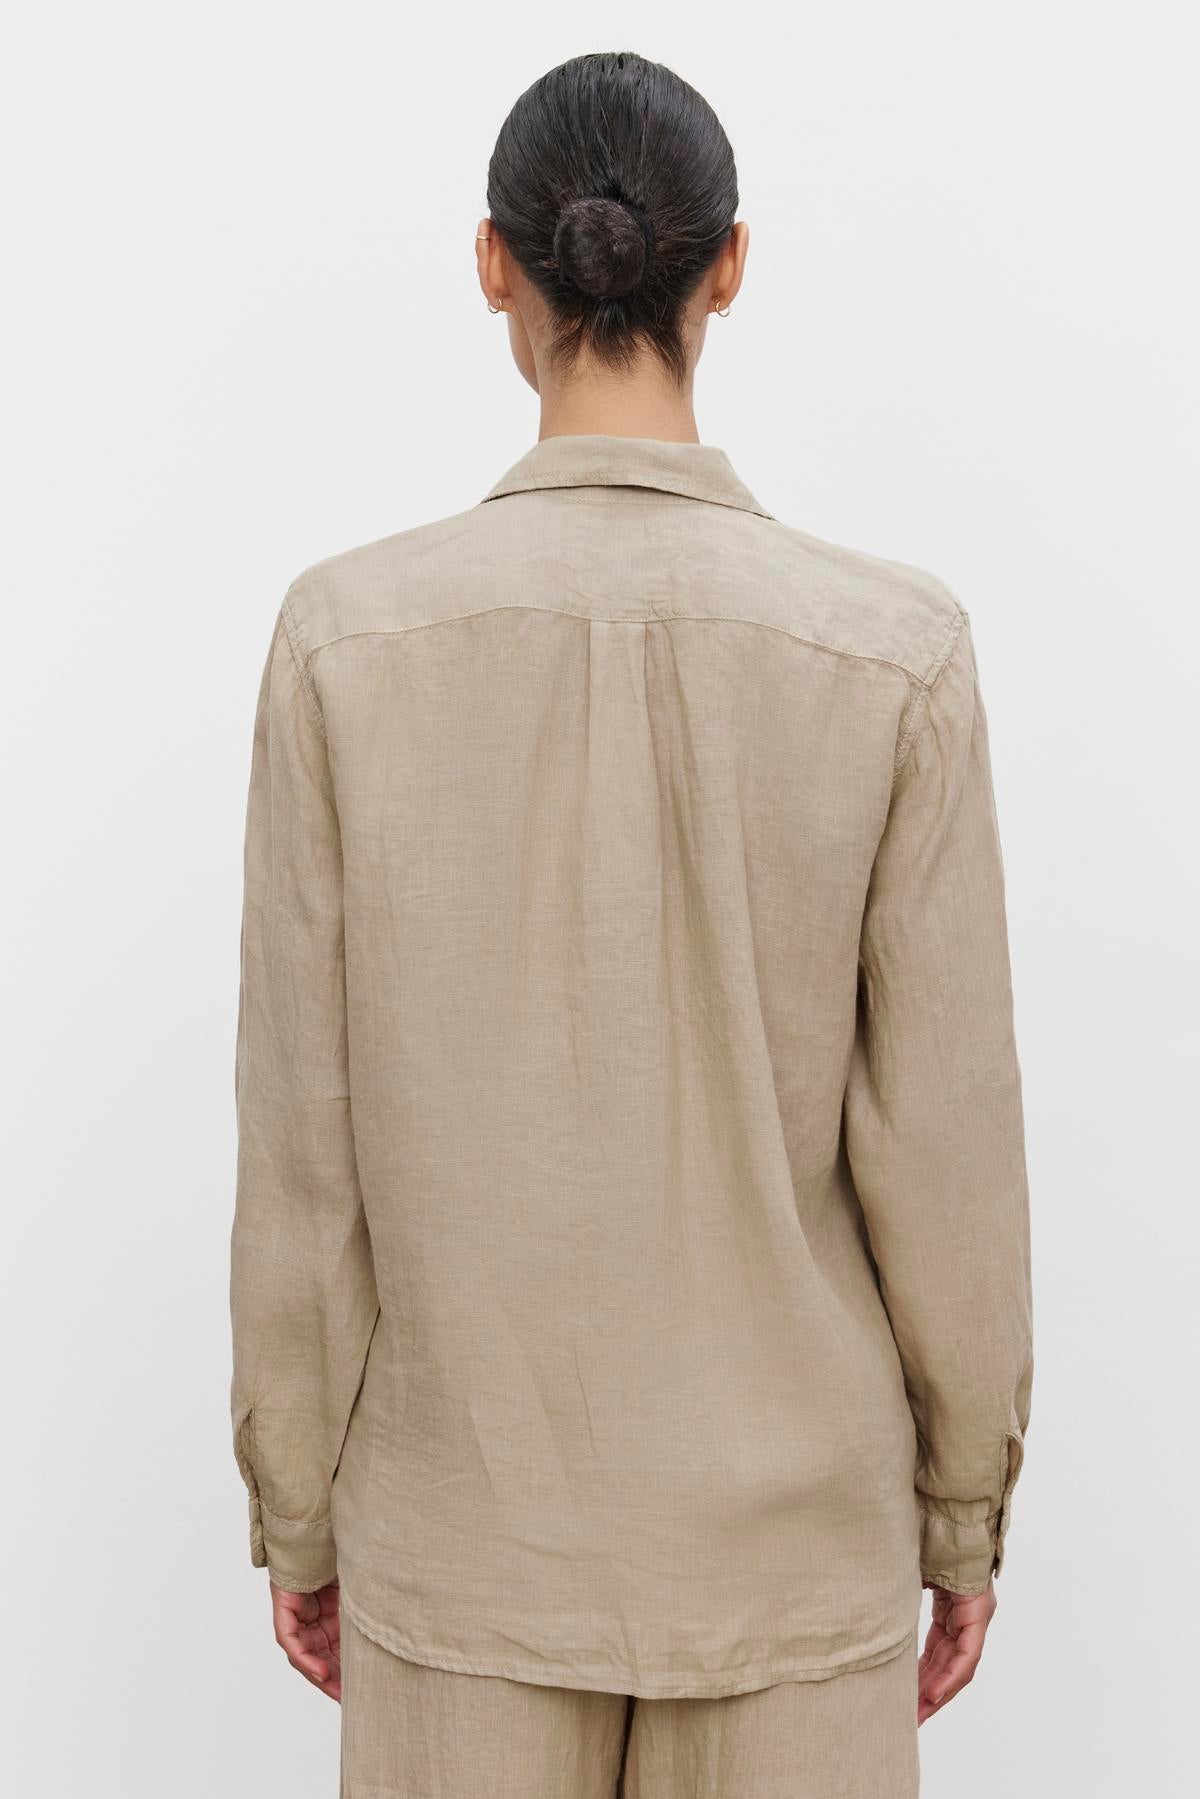 A person with hair in a bun is seen from the back, wearing a beige, long-sleeved MULHOLLAND LINEN SHIRT by Velvet by Jenny Graham with a relaxed silhouette, standing against a plain white background.-36463469723841